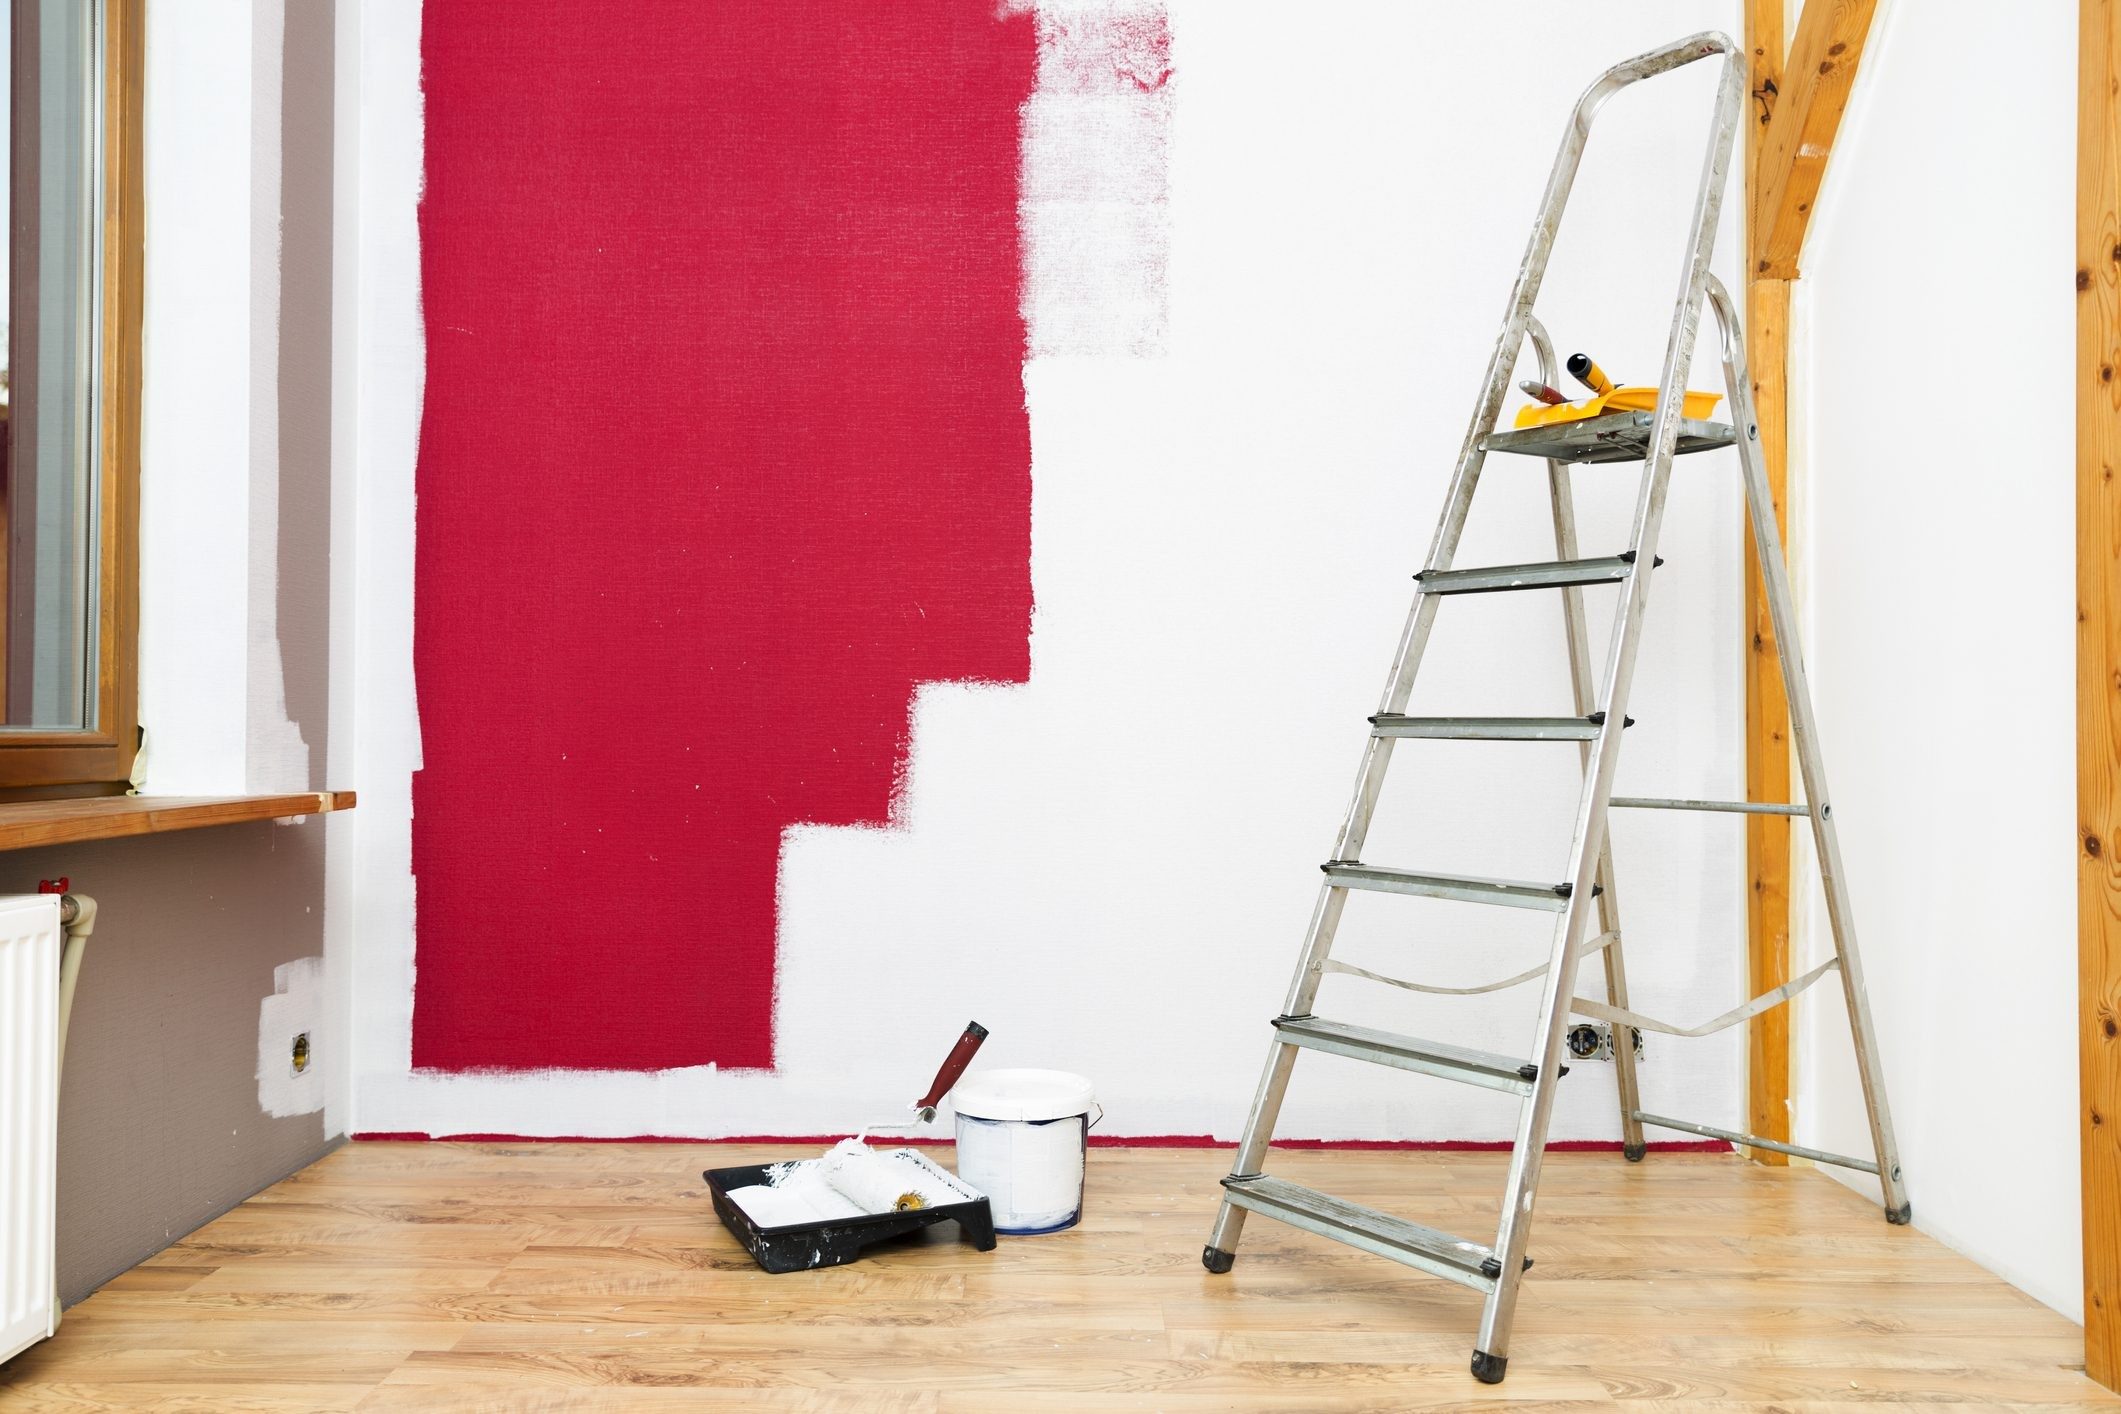 House Painters Share their Tips on Making Small Spaces Appear Larger